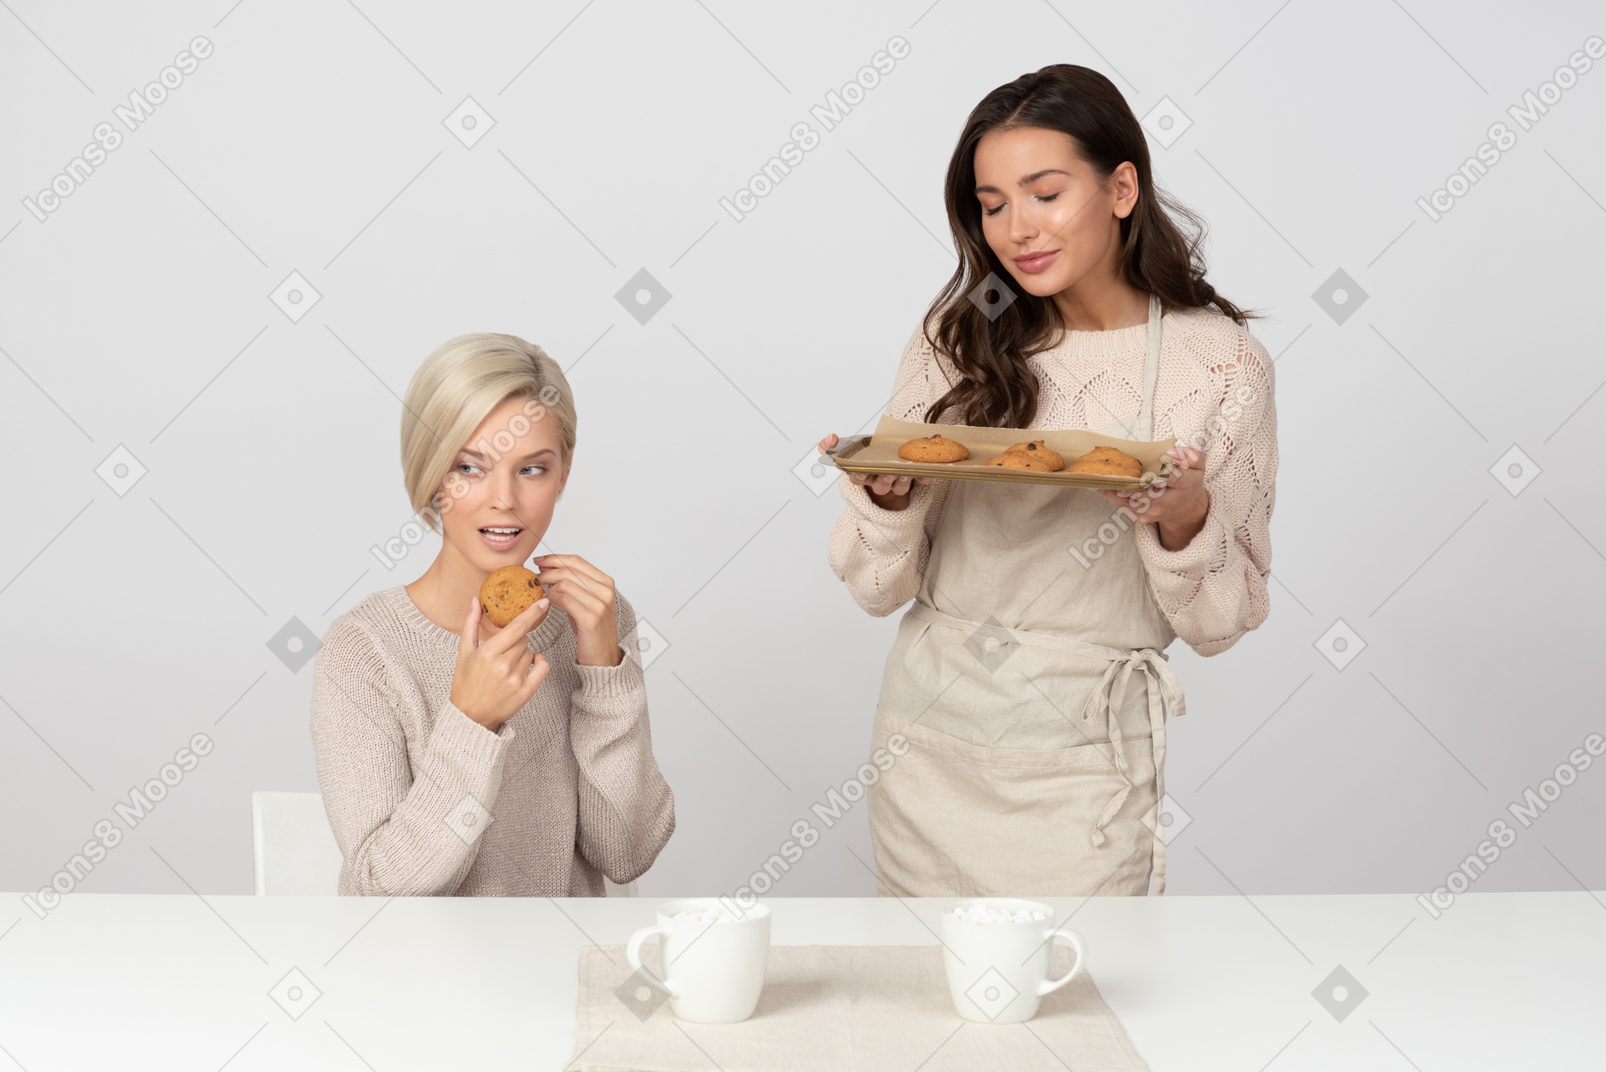 Young woman eating her friend's cookies